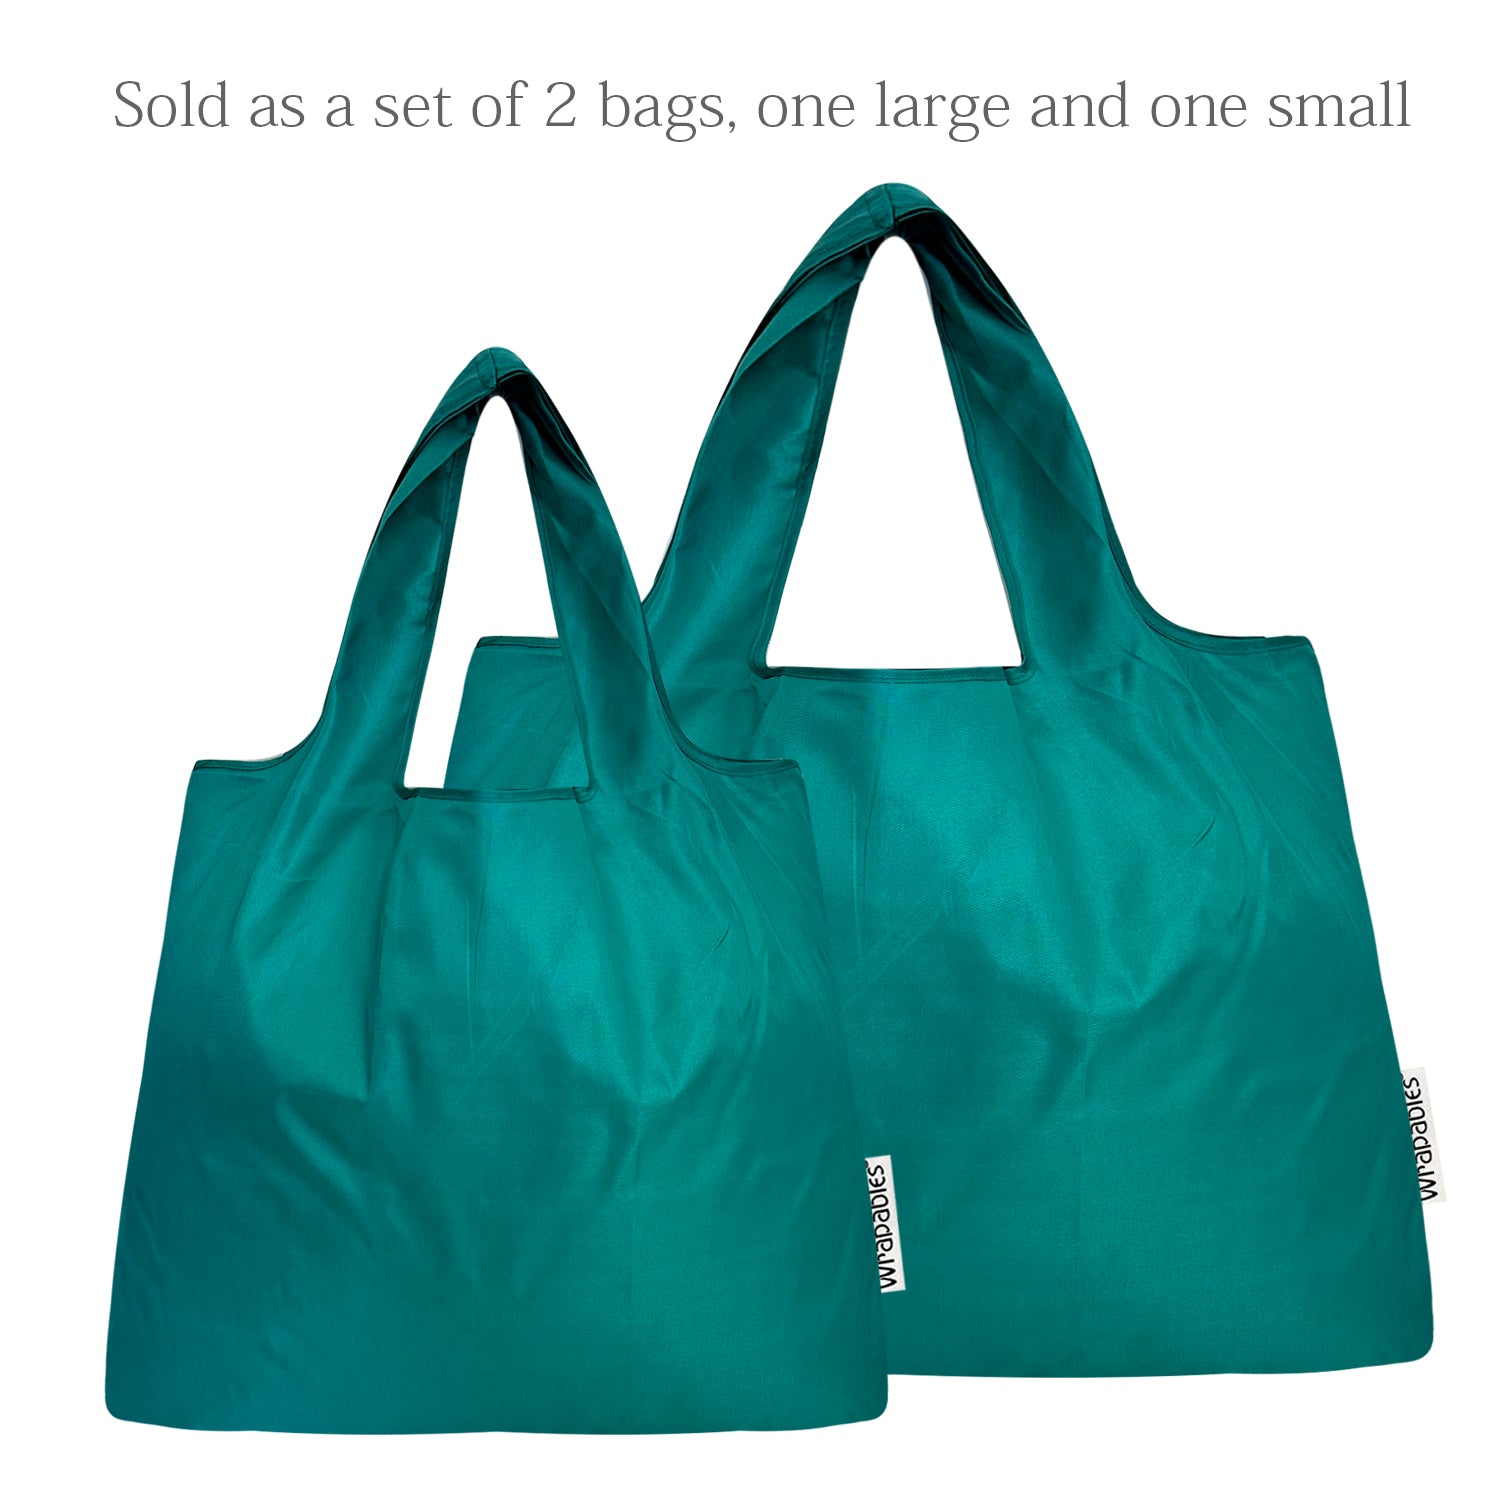 Wrapables Large & Small Foldable Tote Nylon Reusable Grocery Bags, Set